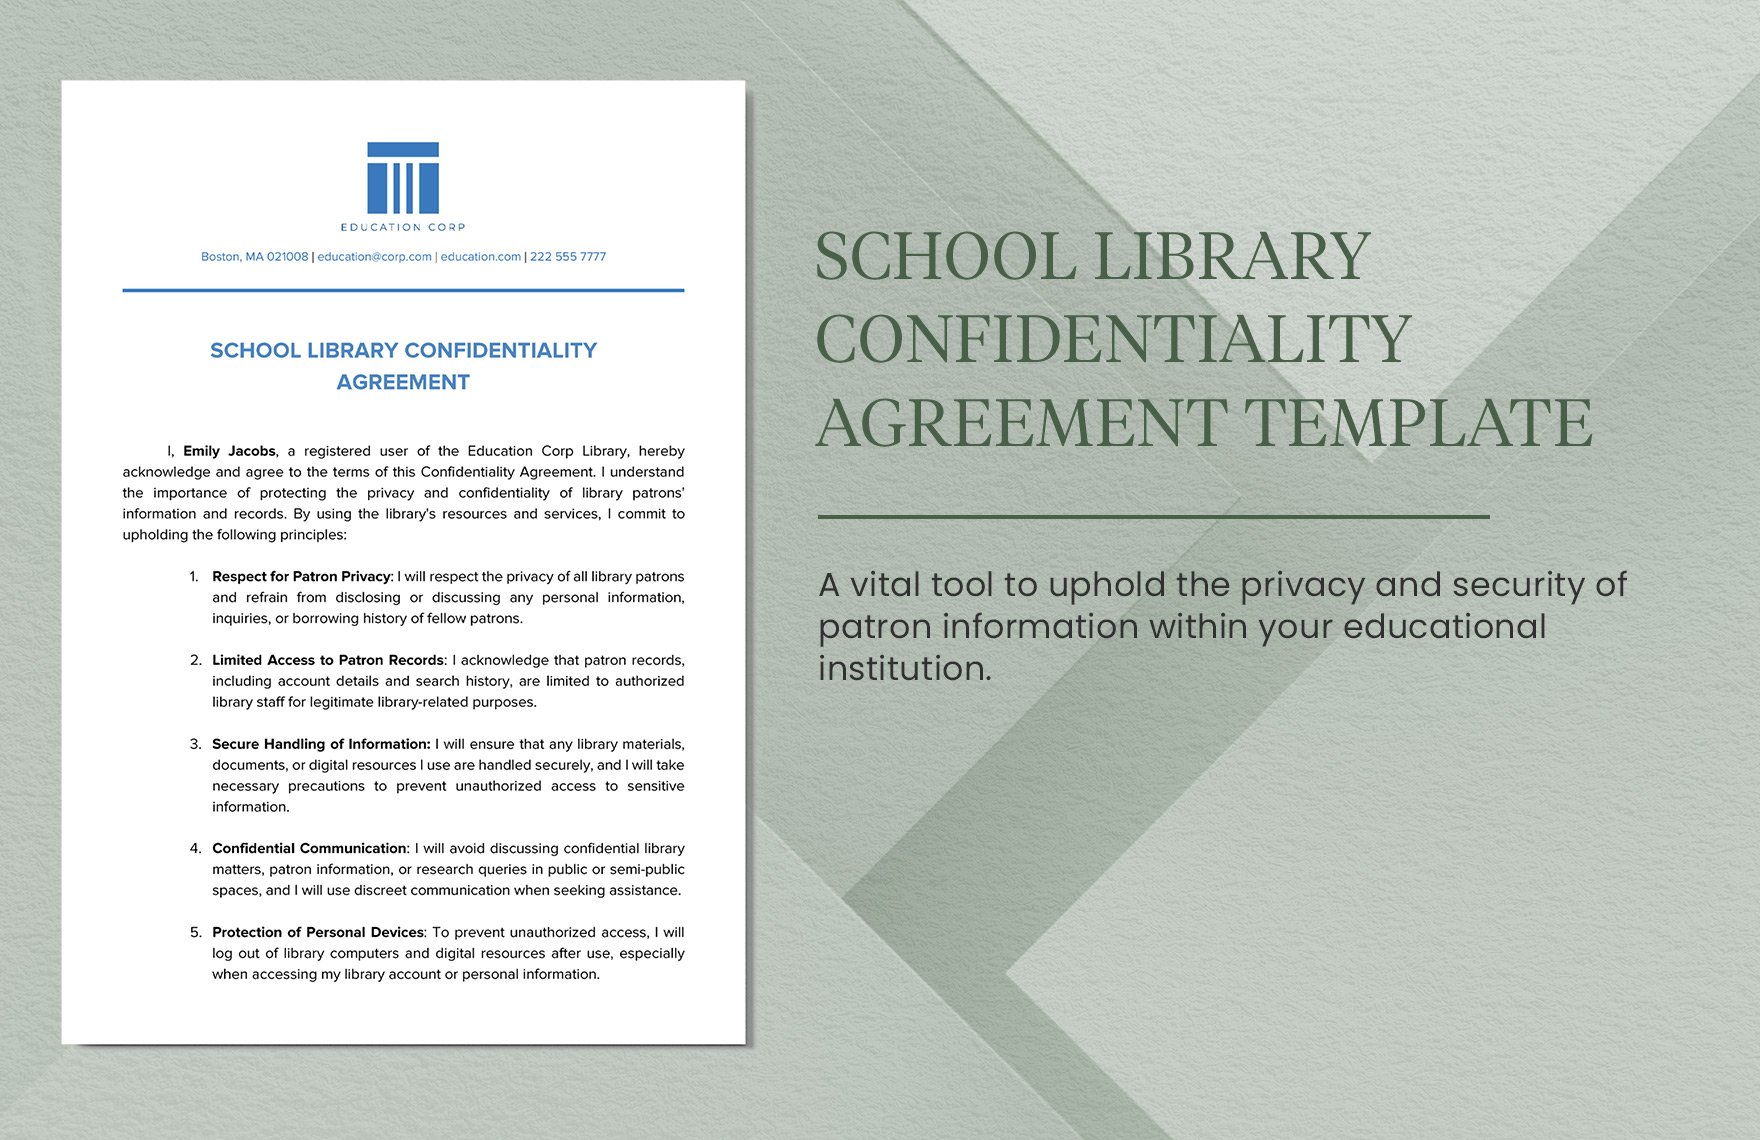 School Library Confidentiality Agreement Template